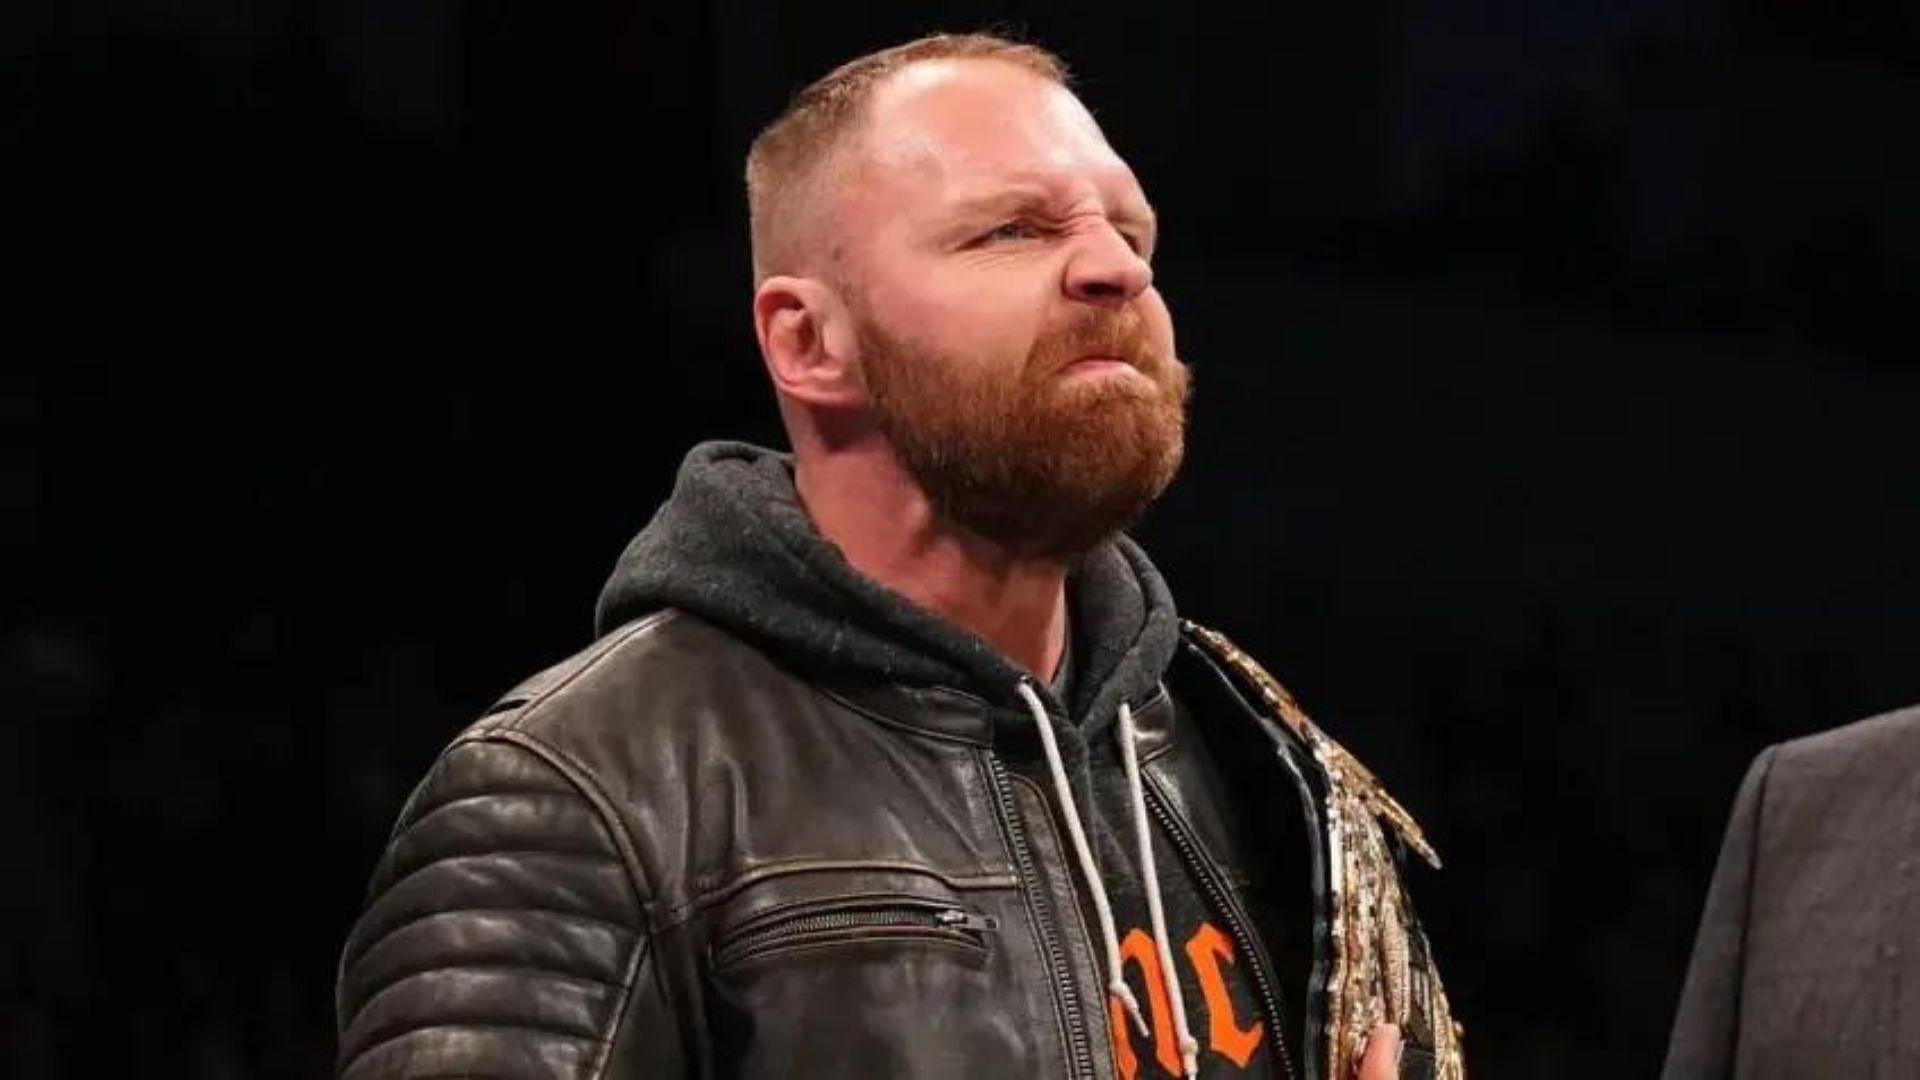 Jon Moxley is the current AEW International Champion